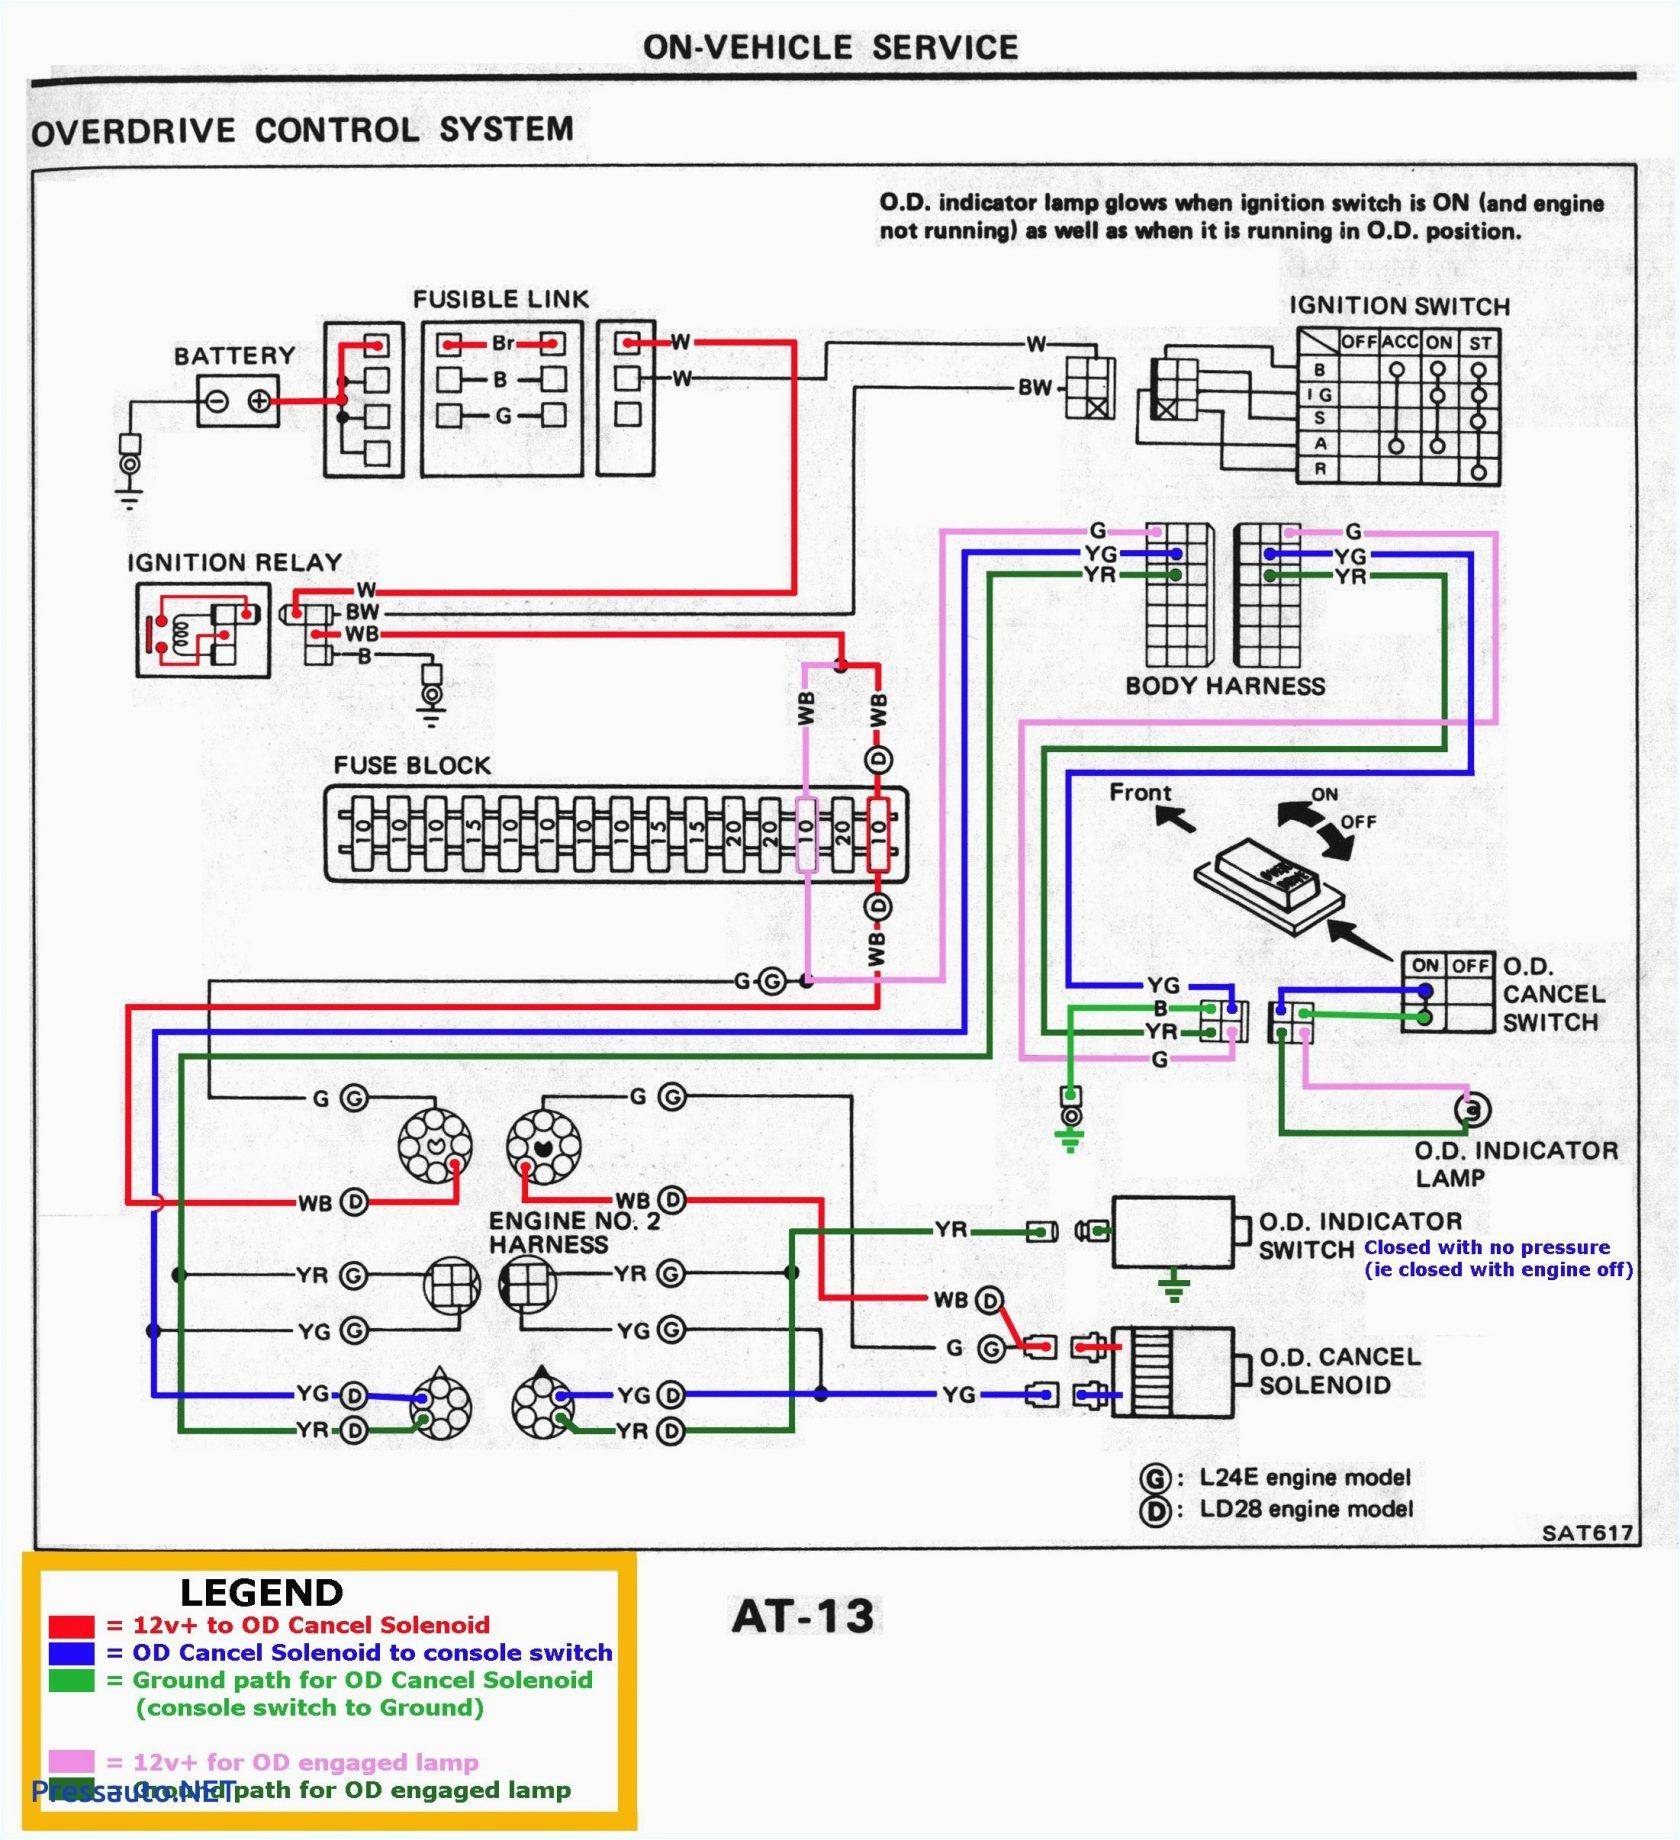 wiring diagram for 2007 toyota camry get free image about wiring wiring diagram for toyota camry get free image about wiring free